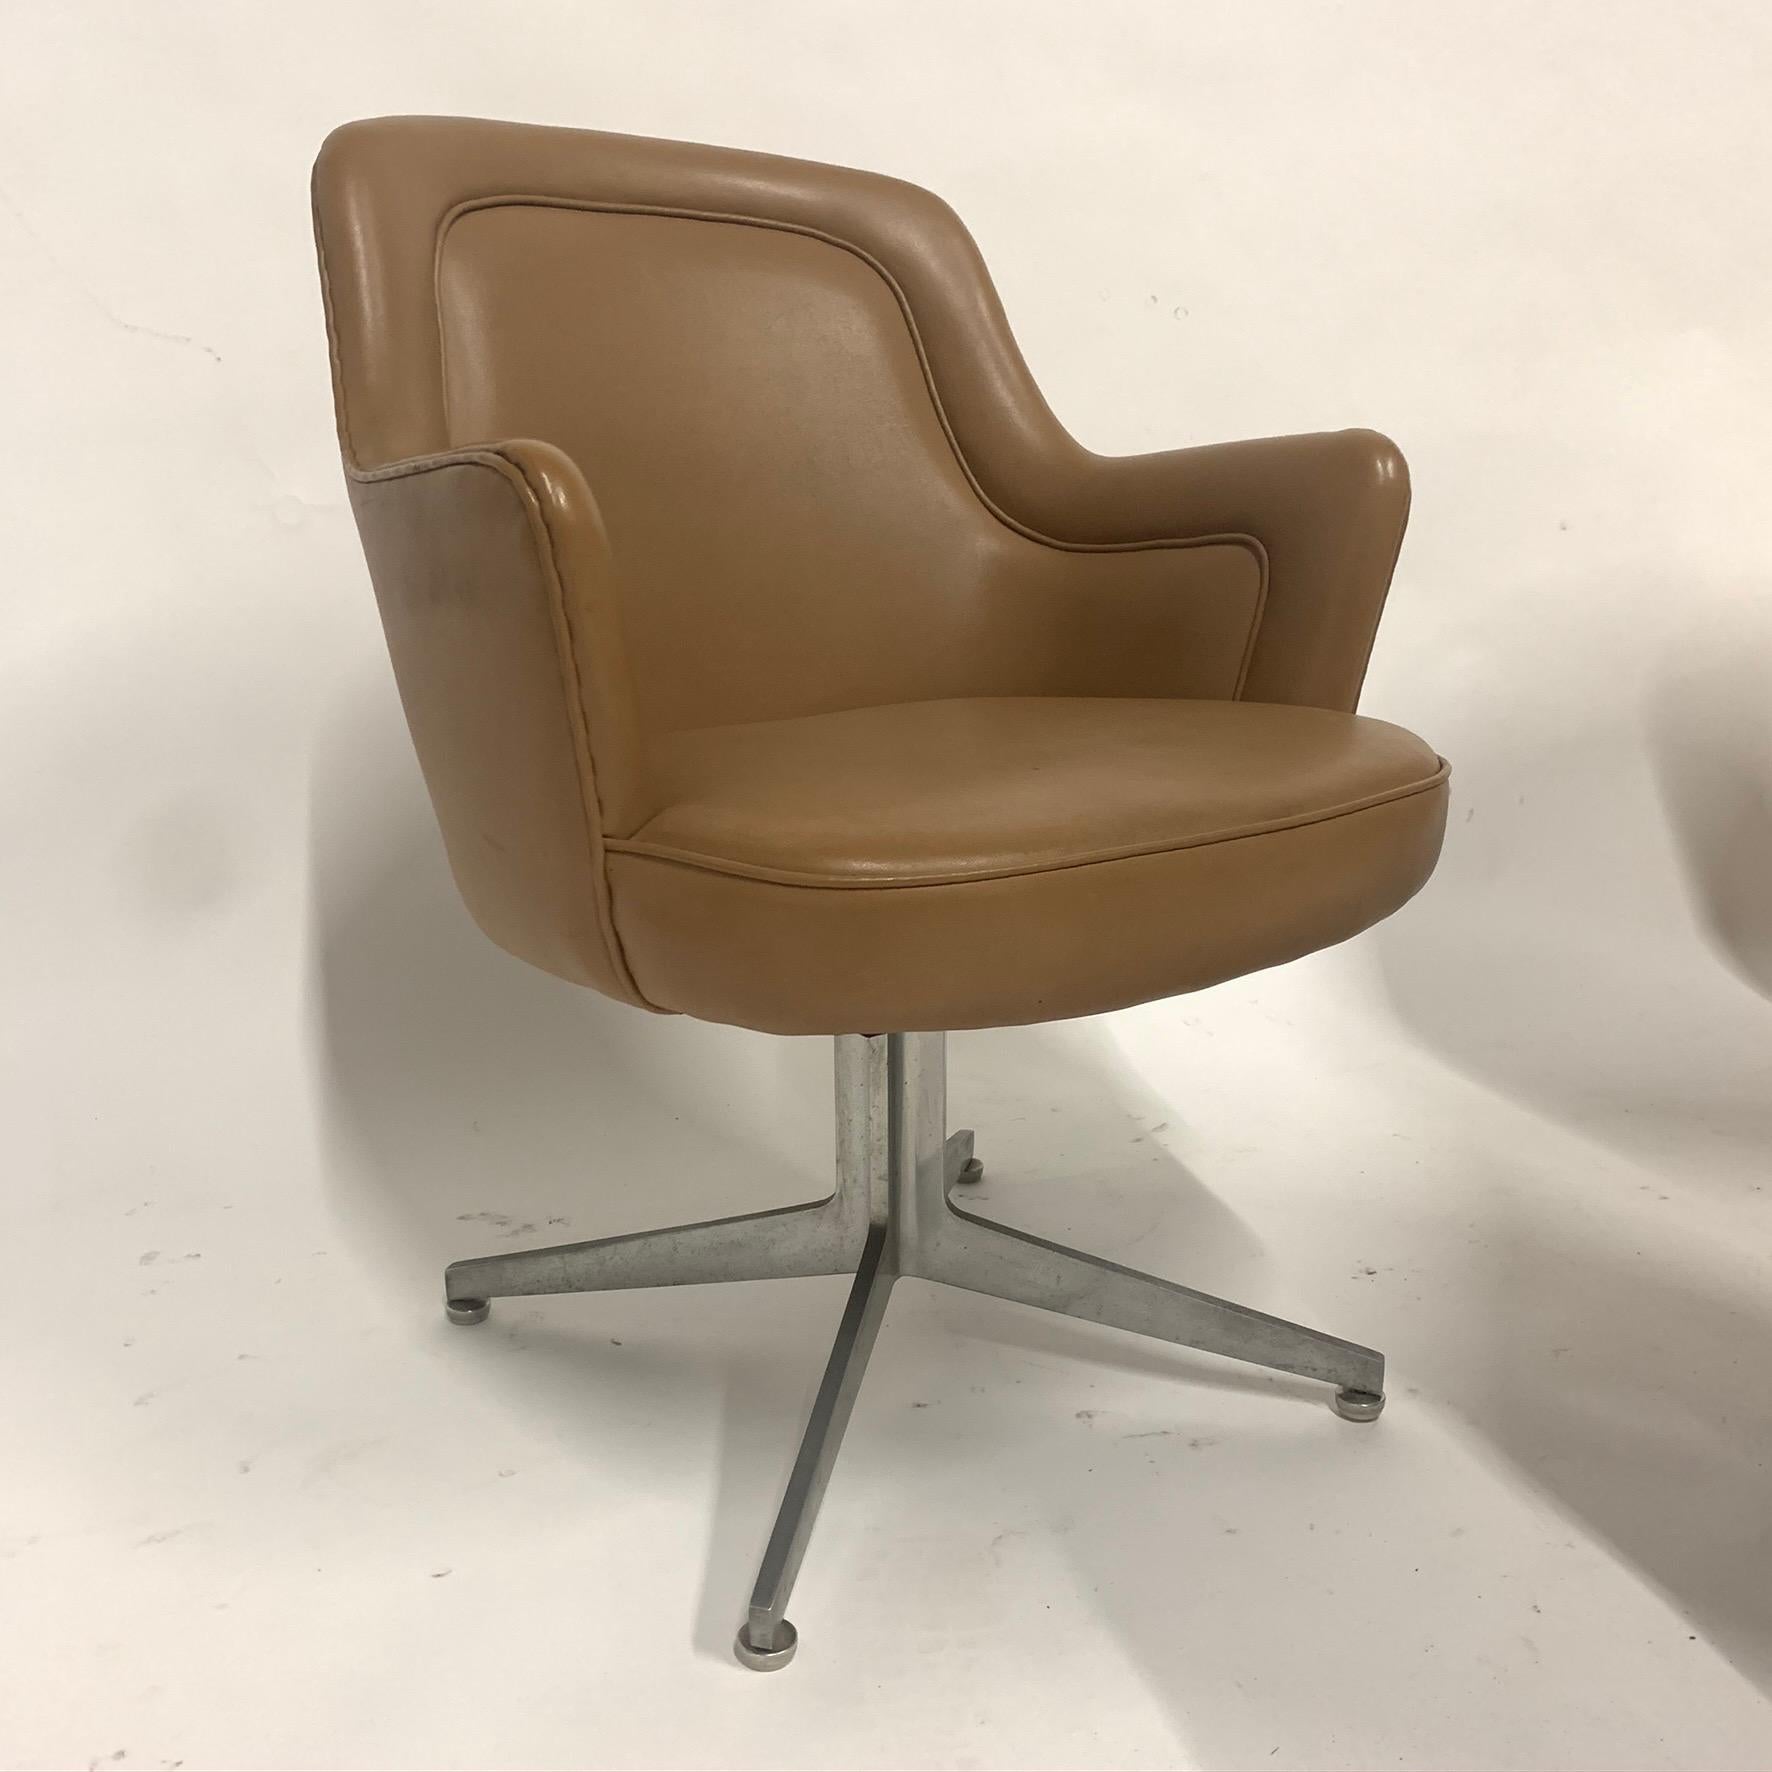 Ward Bennett amazingly sleek designed office chair on aluminium star base. 3 available. All good condition with the exception of the naugahyde upholstery. All have some small tears and nicks in naugahyde here and there. Could be used as is, but good